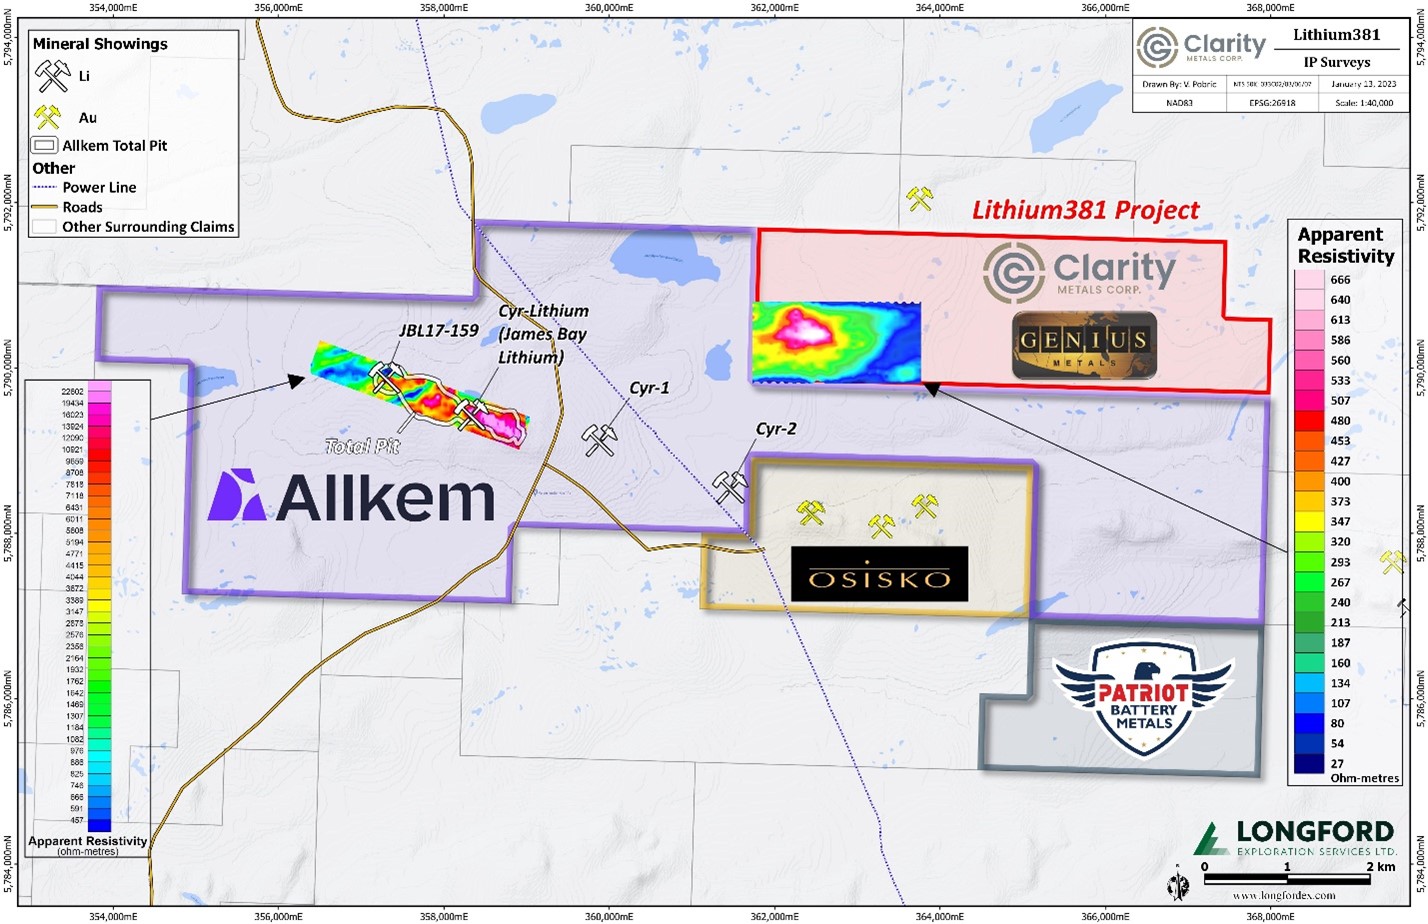 figure 1 Clarity Files Drill Permit Application for Lithium381 Project